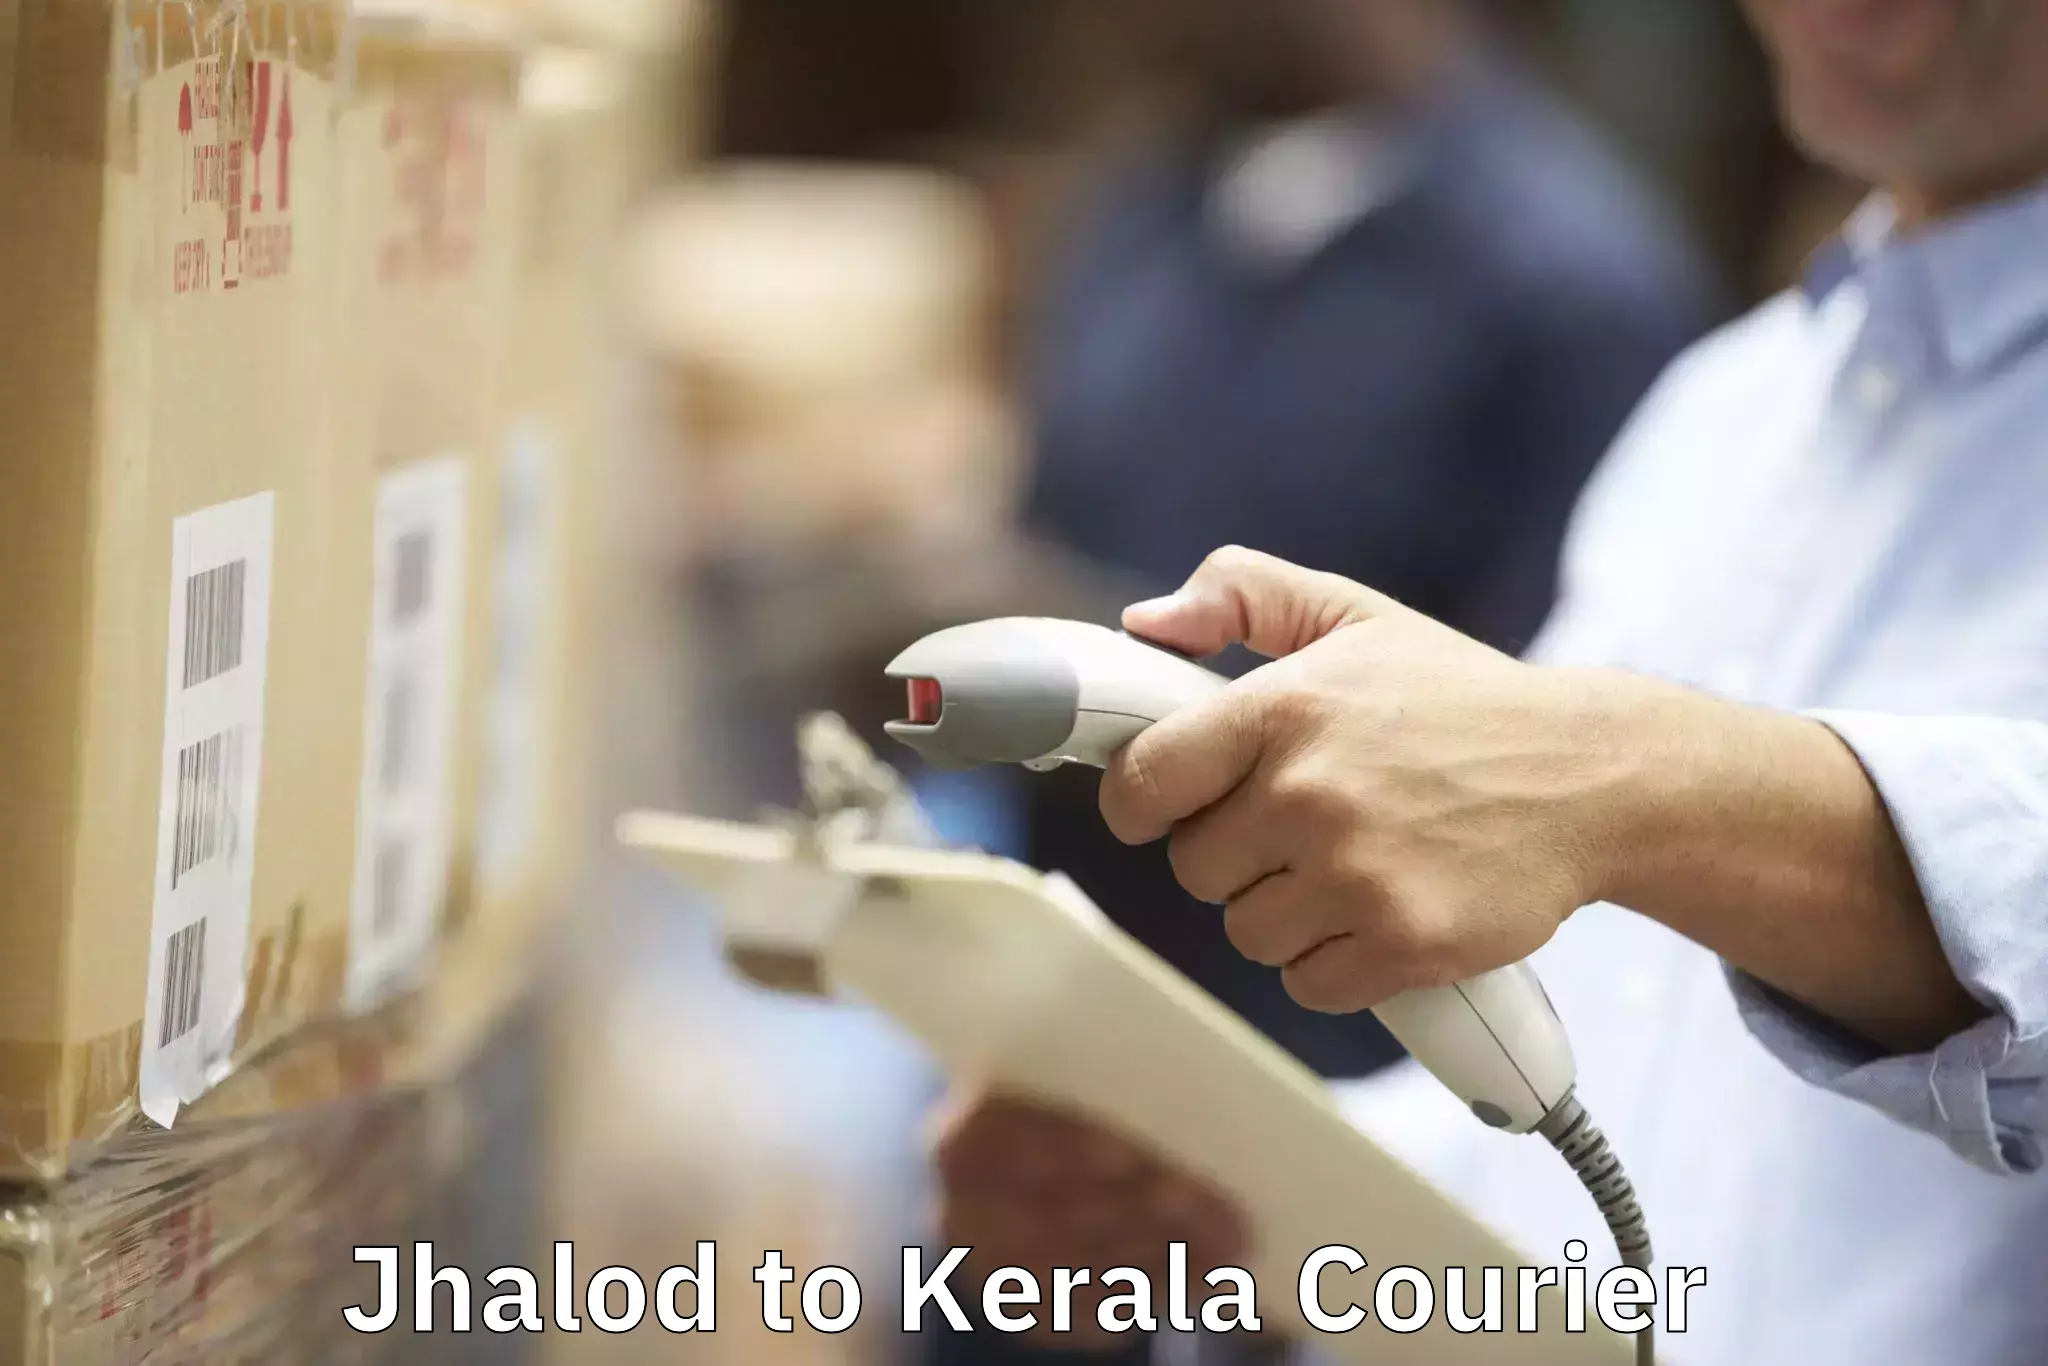 Trusted relocation experts Jhalod to Kerala